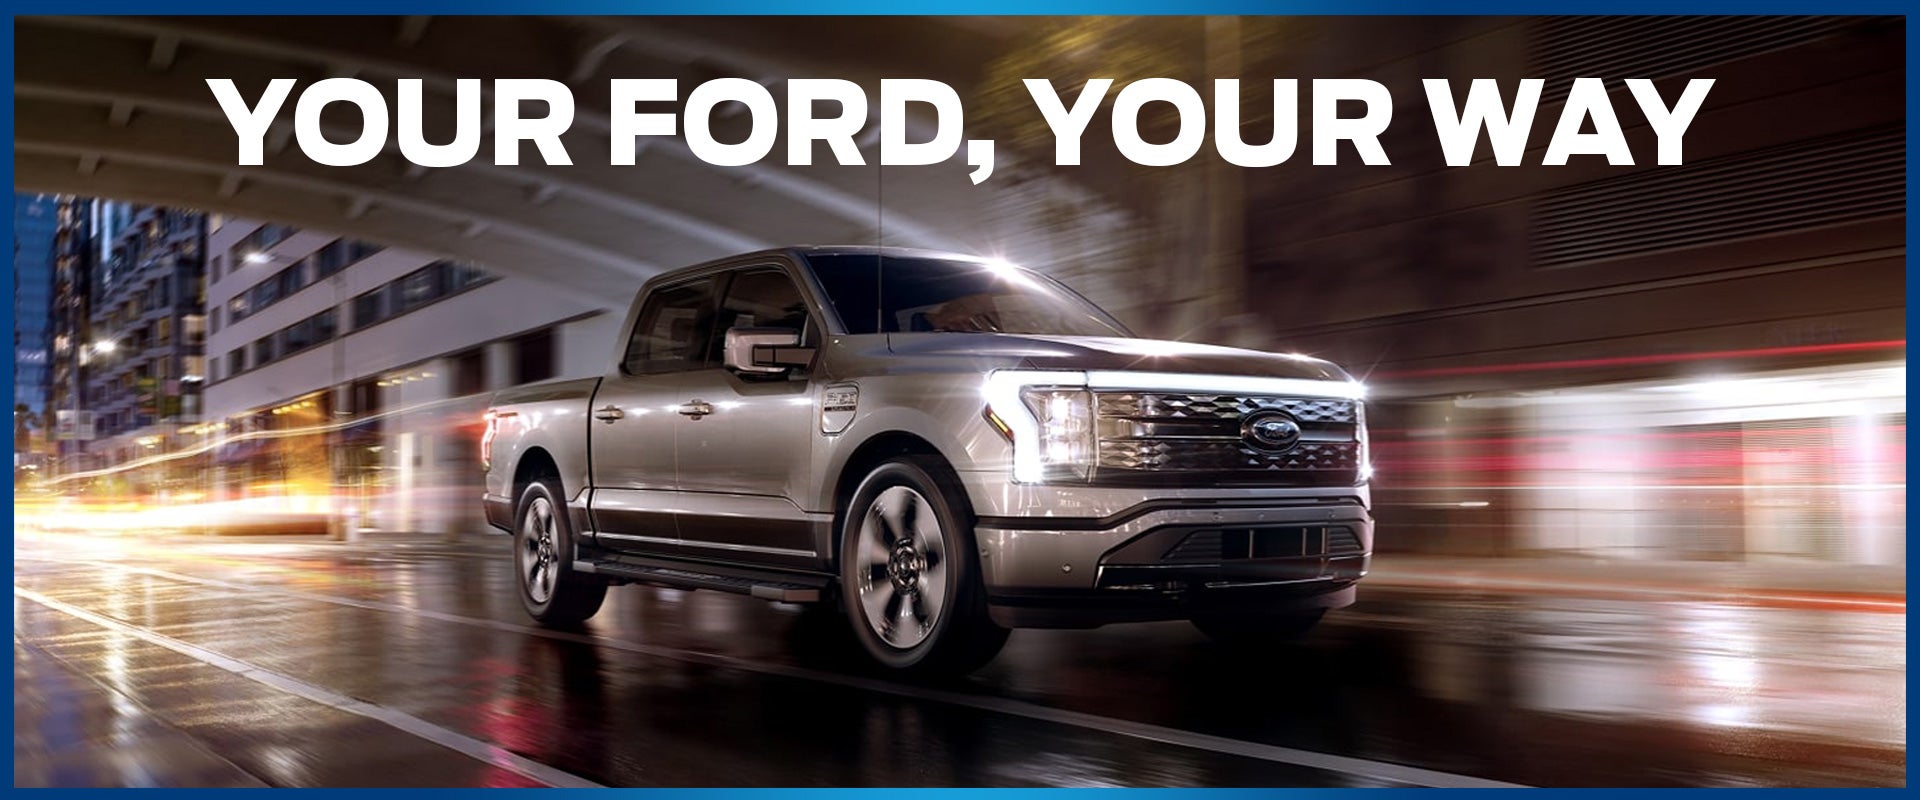 how to build your own Ford